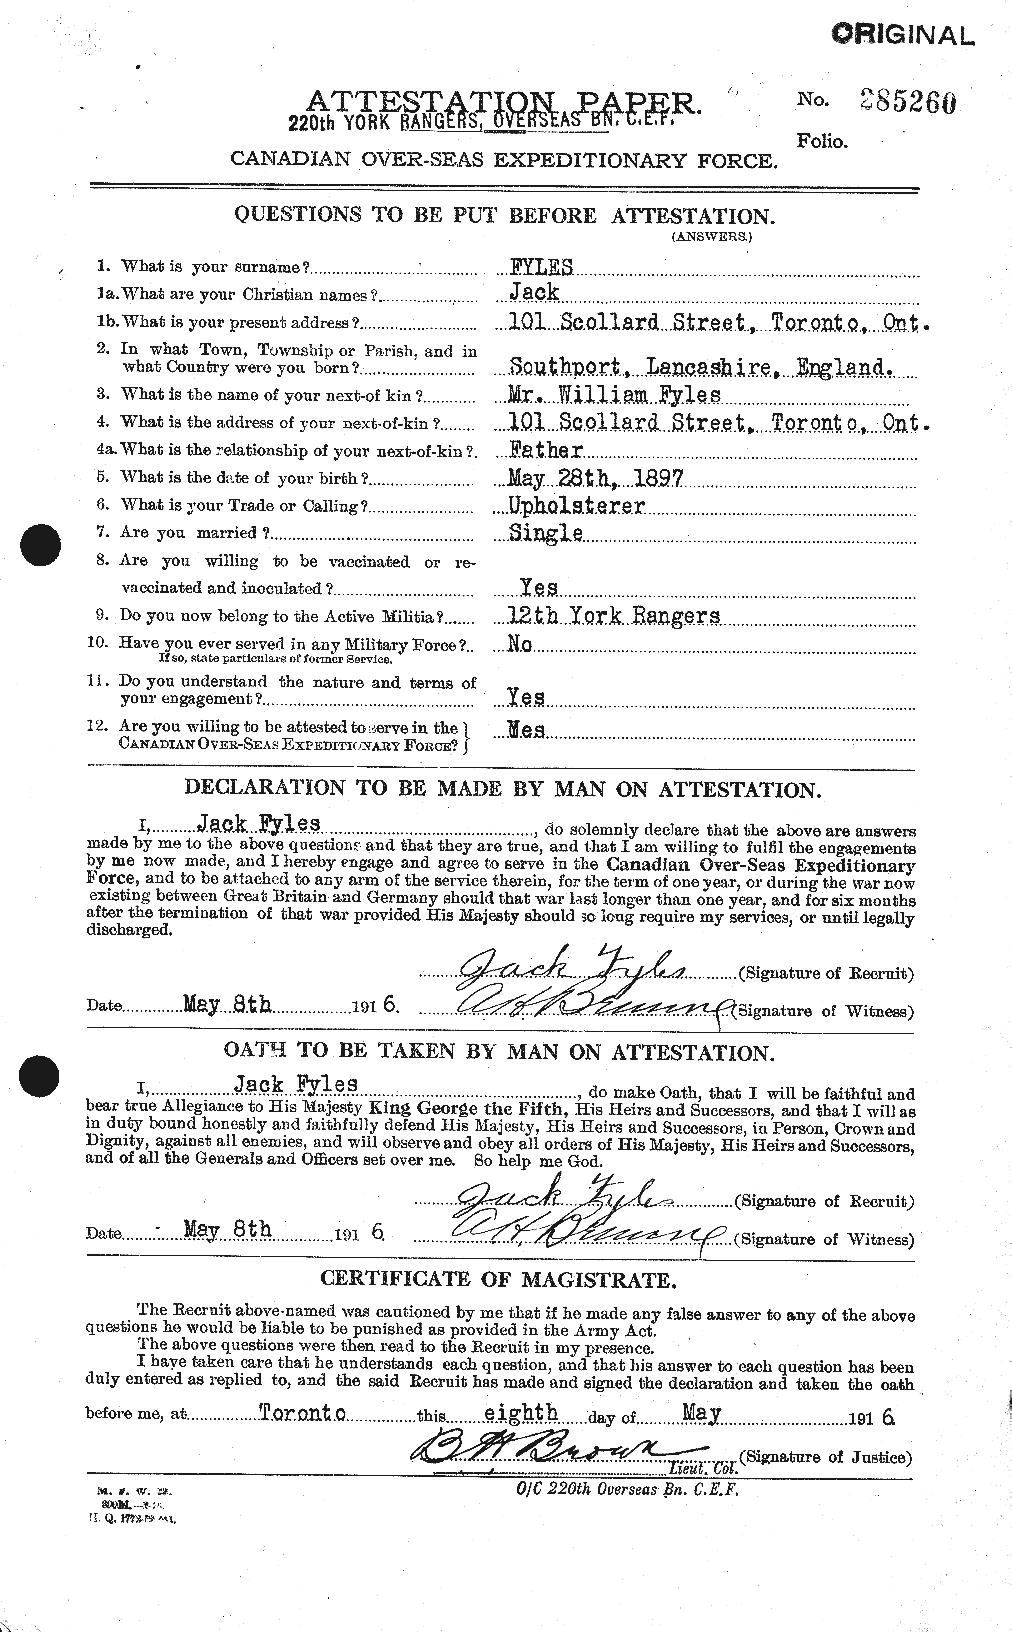 Personnel Records of the First World War - CEF 338877a